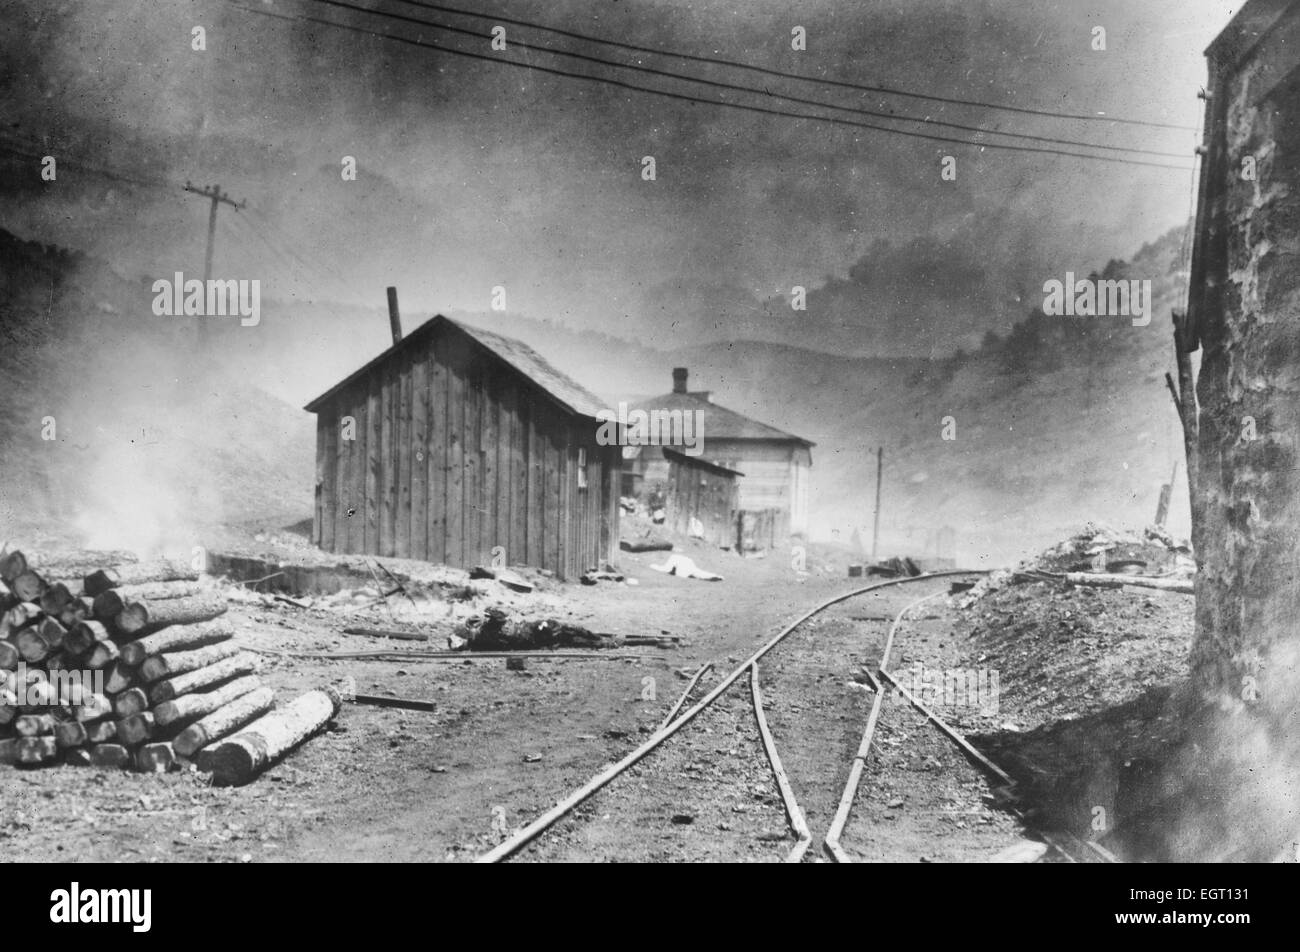 Burning of miner's camp at Forbes during strike battle, Colorado. Two bodies shrouded under a sheet at Ludlow Massacre, during which a tent camp of striking miners at Ludlow Colorado was attacked by the Colorado National Guard on April 20, 1914. Stock Photo